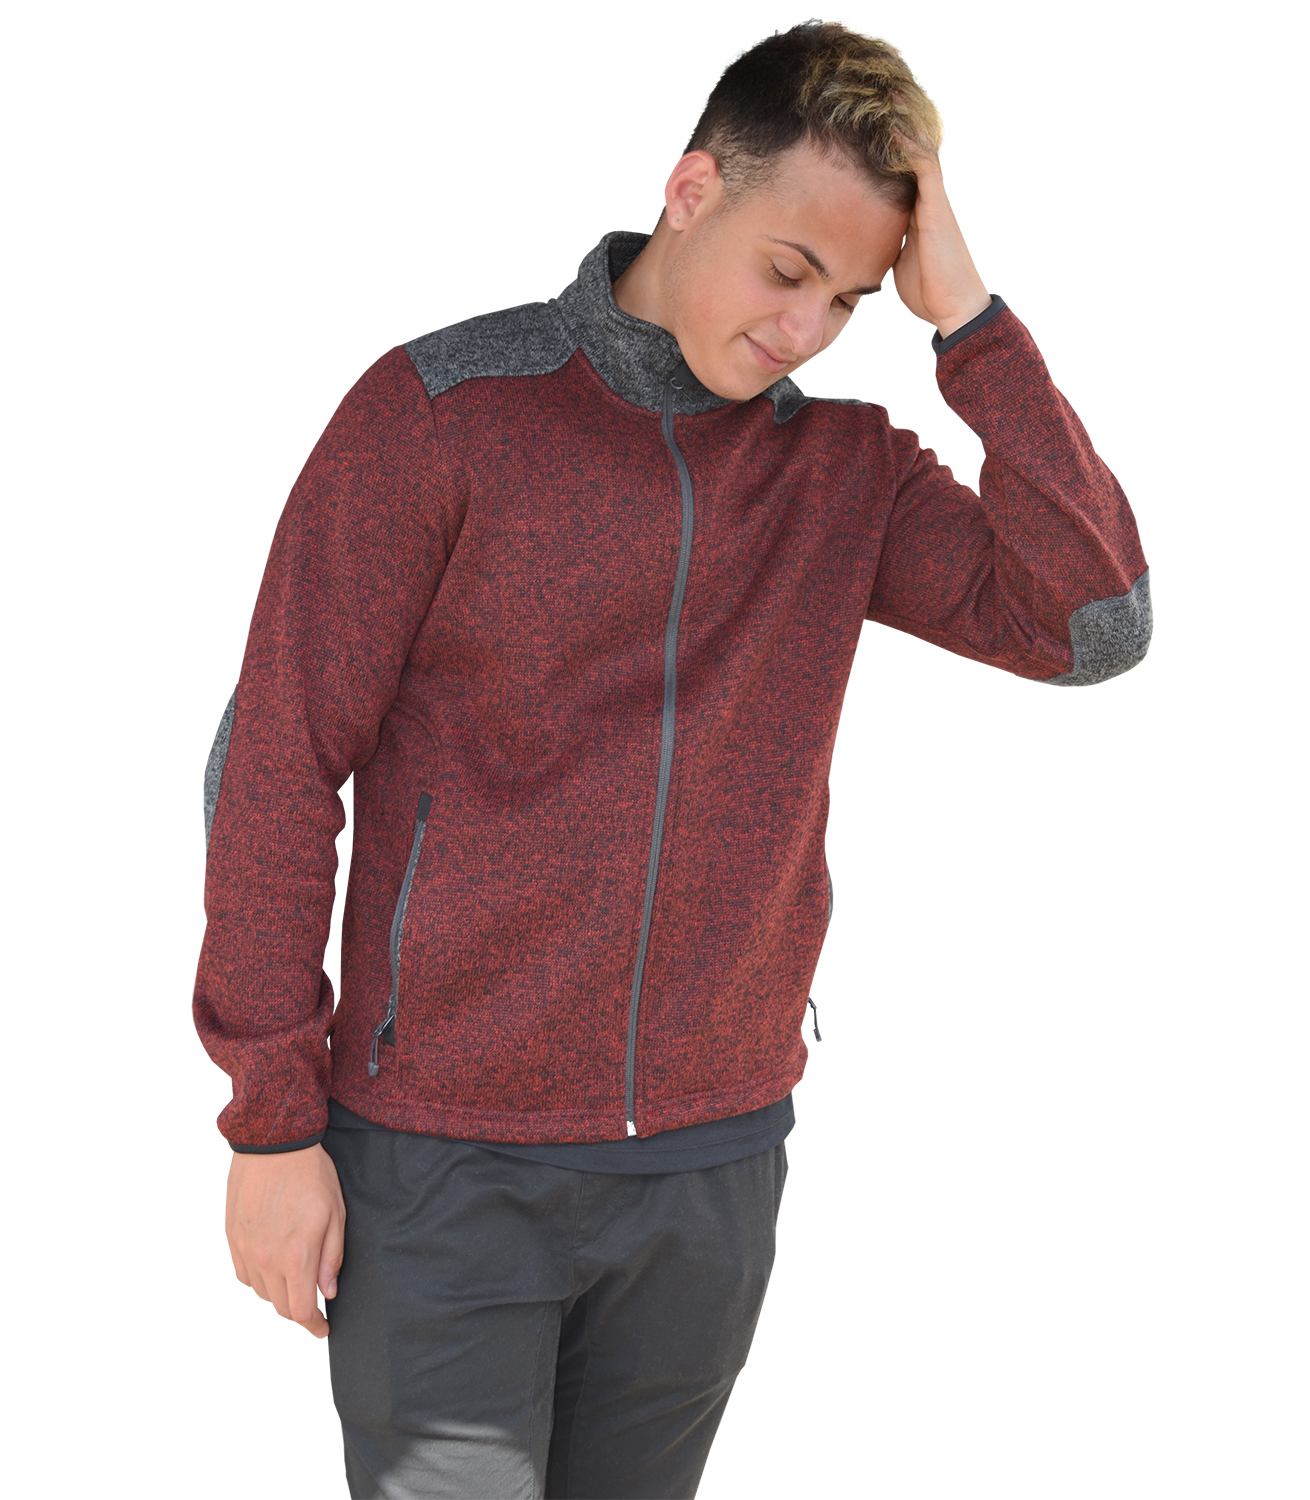 Renegade mens fleece elbow patch sweater, color blocking, maroon, zipper, wholesale blanks for embridery